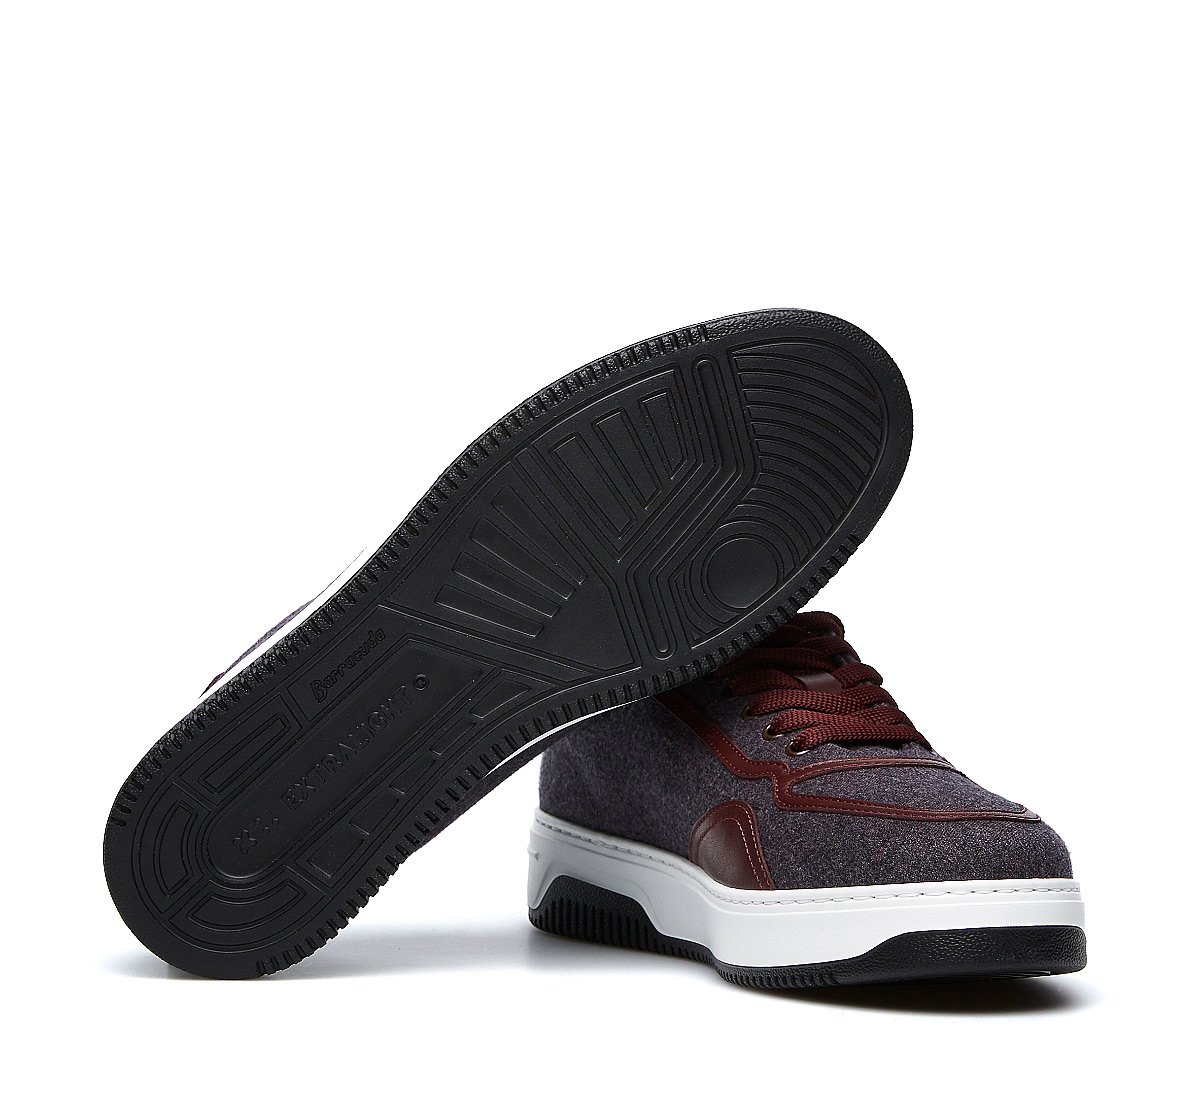 New breathable/dry sneaker by Reda Active Merino Wool